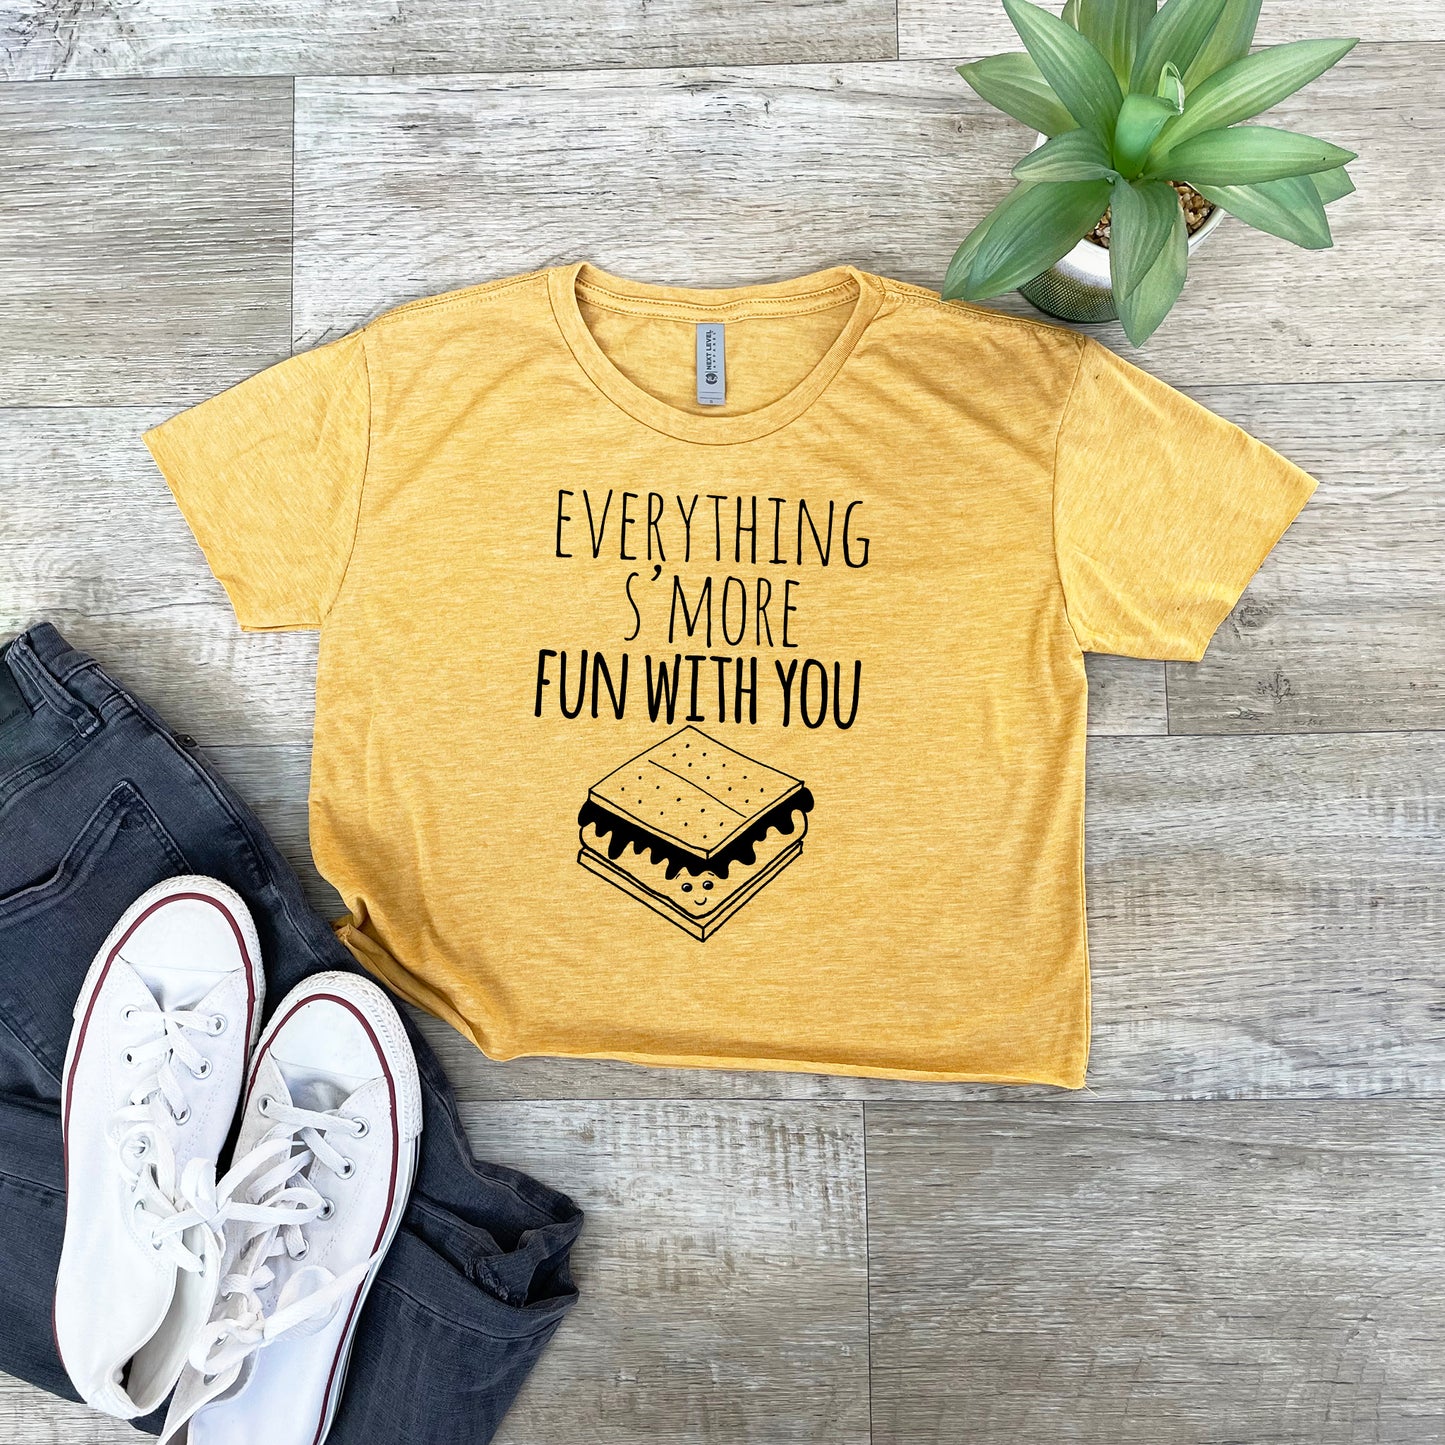 Everything S'more Fun With You - Women's Crop Tee - Heather Gray or Gold